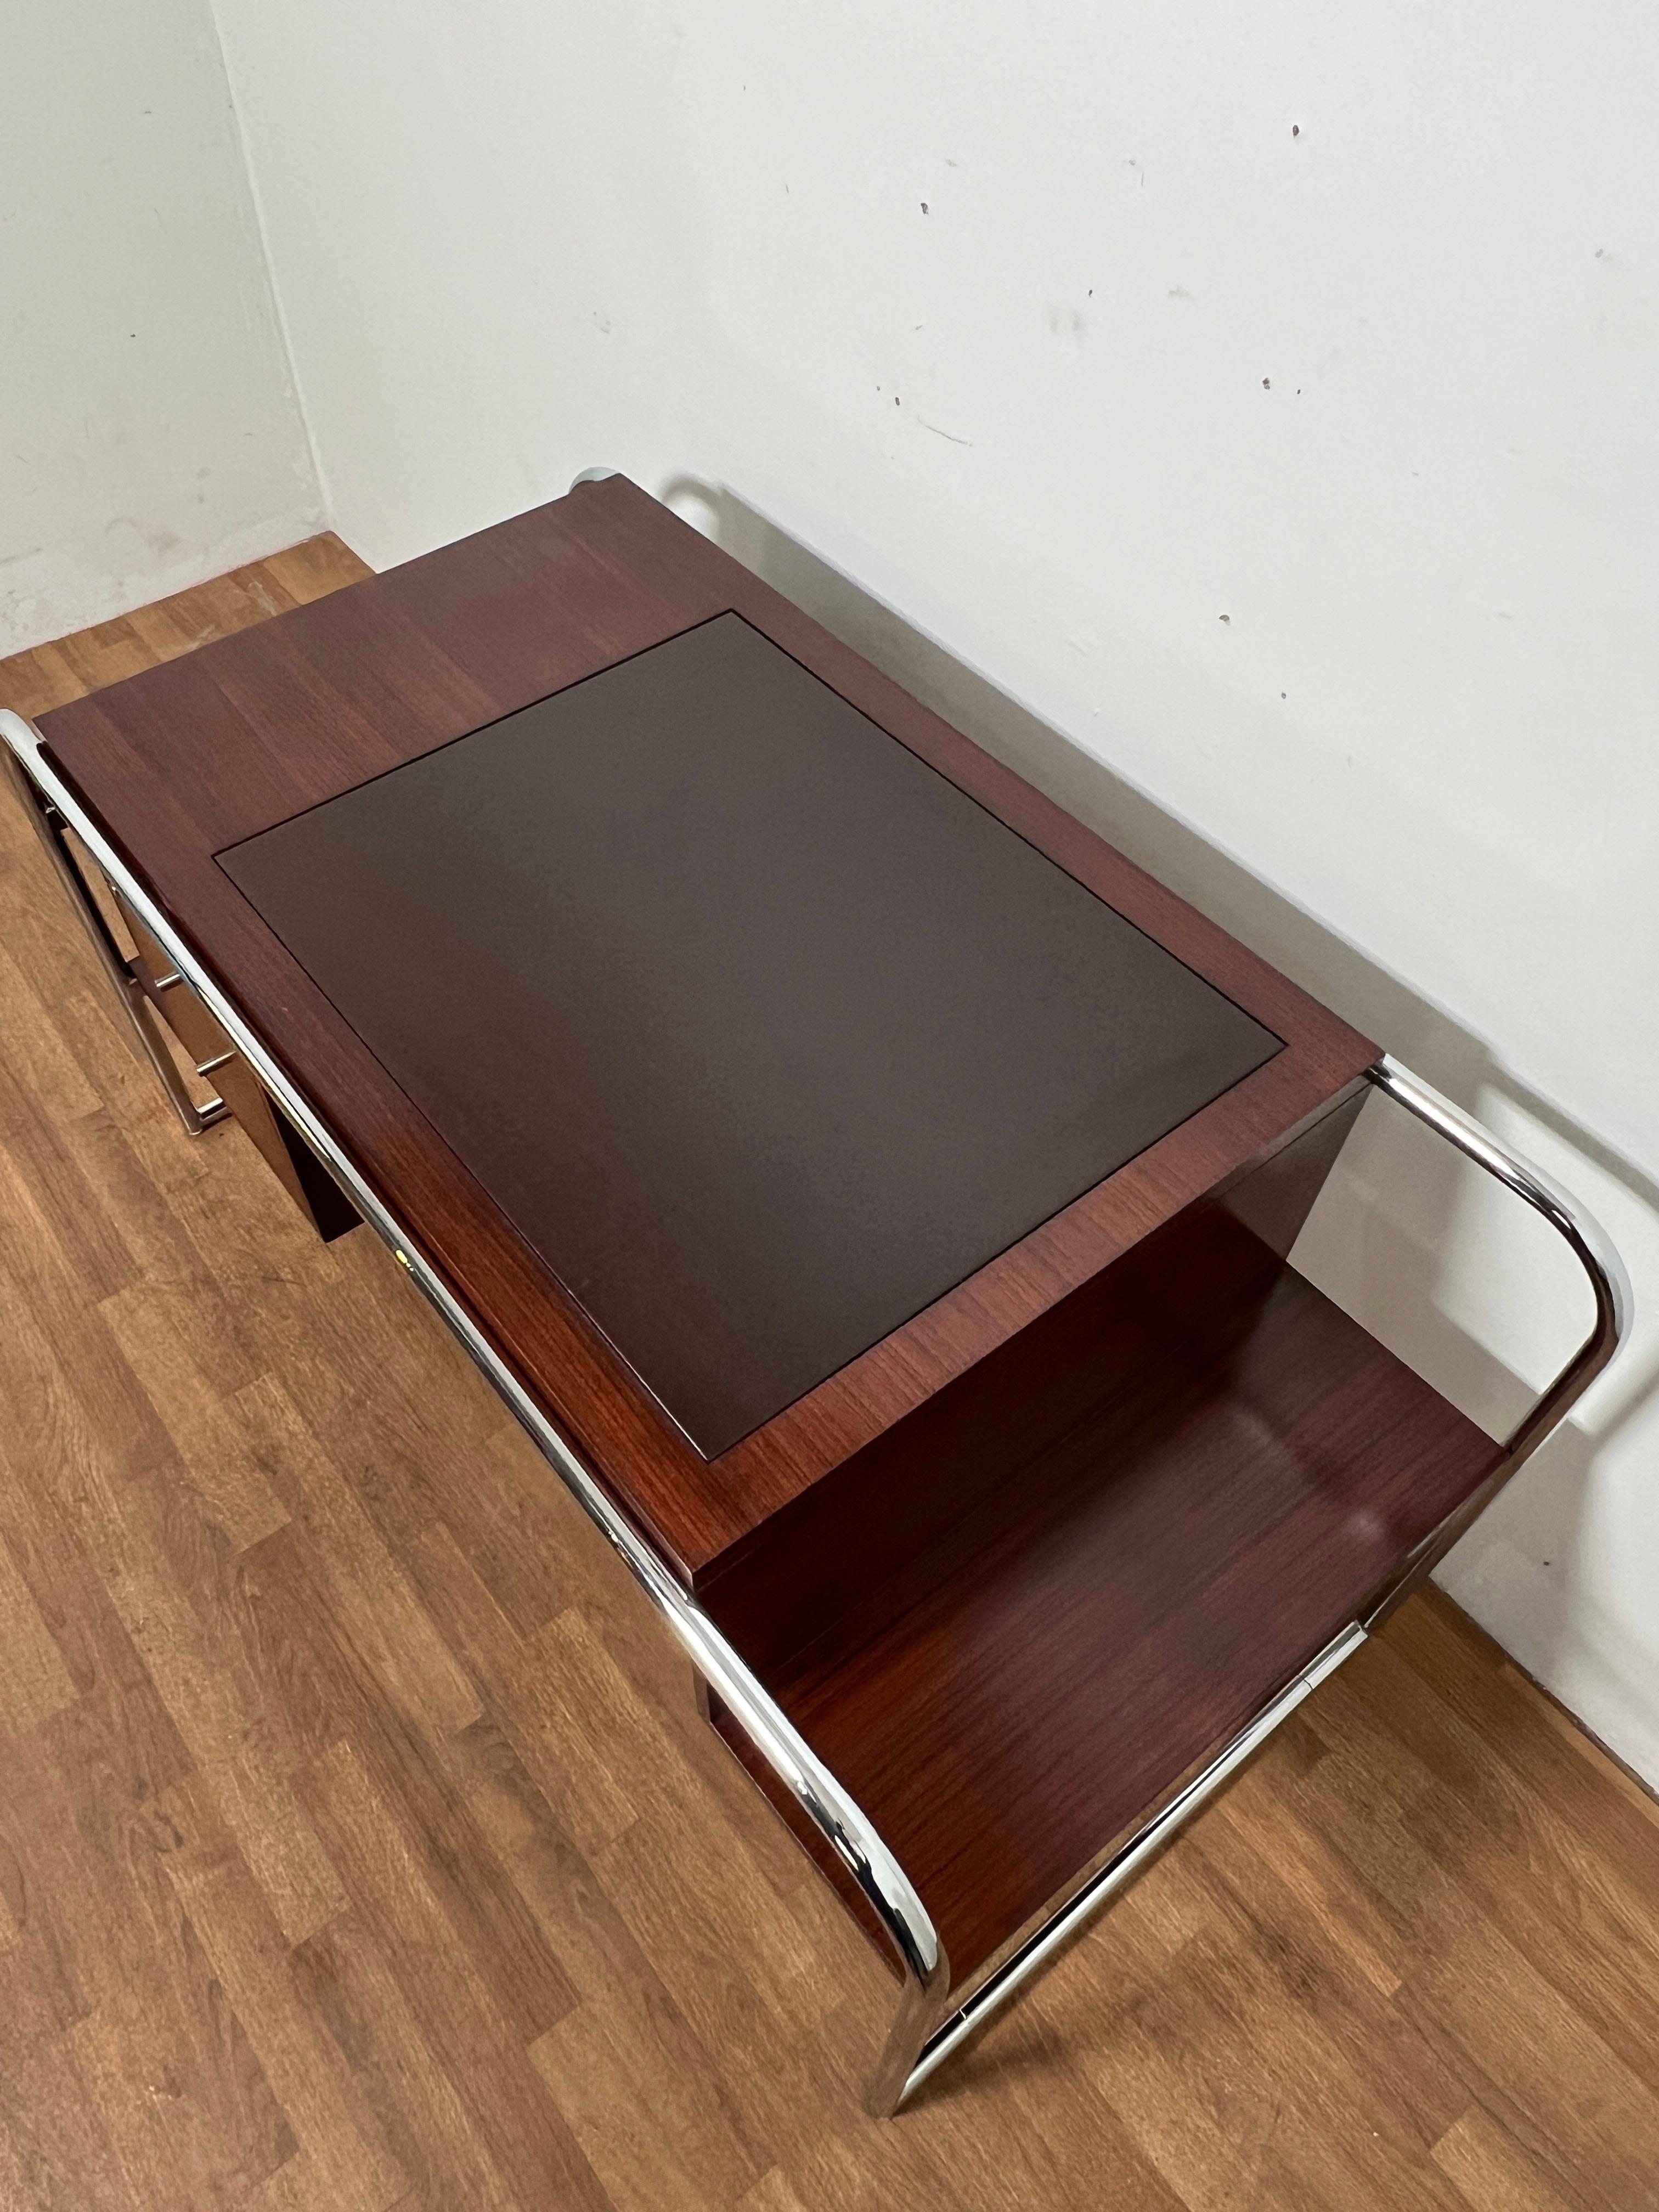 Ralph Lauren Bauhaus Inspired Desk in Wenge, Chrome and Leather In Good Condition In Peabody, MA